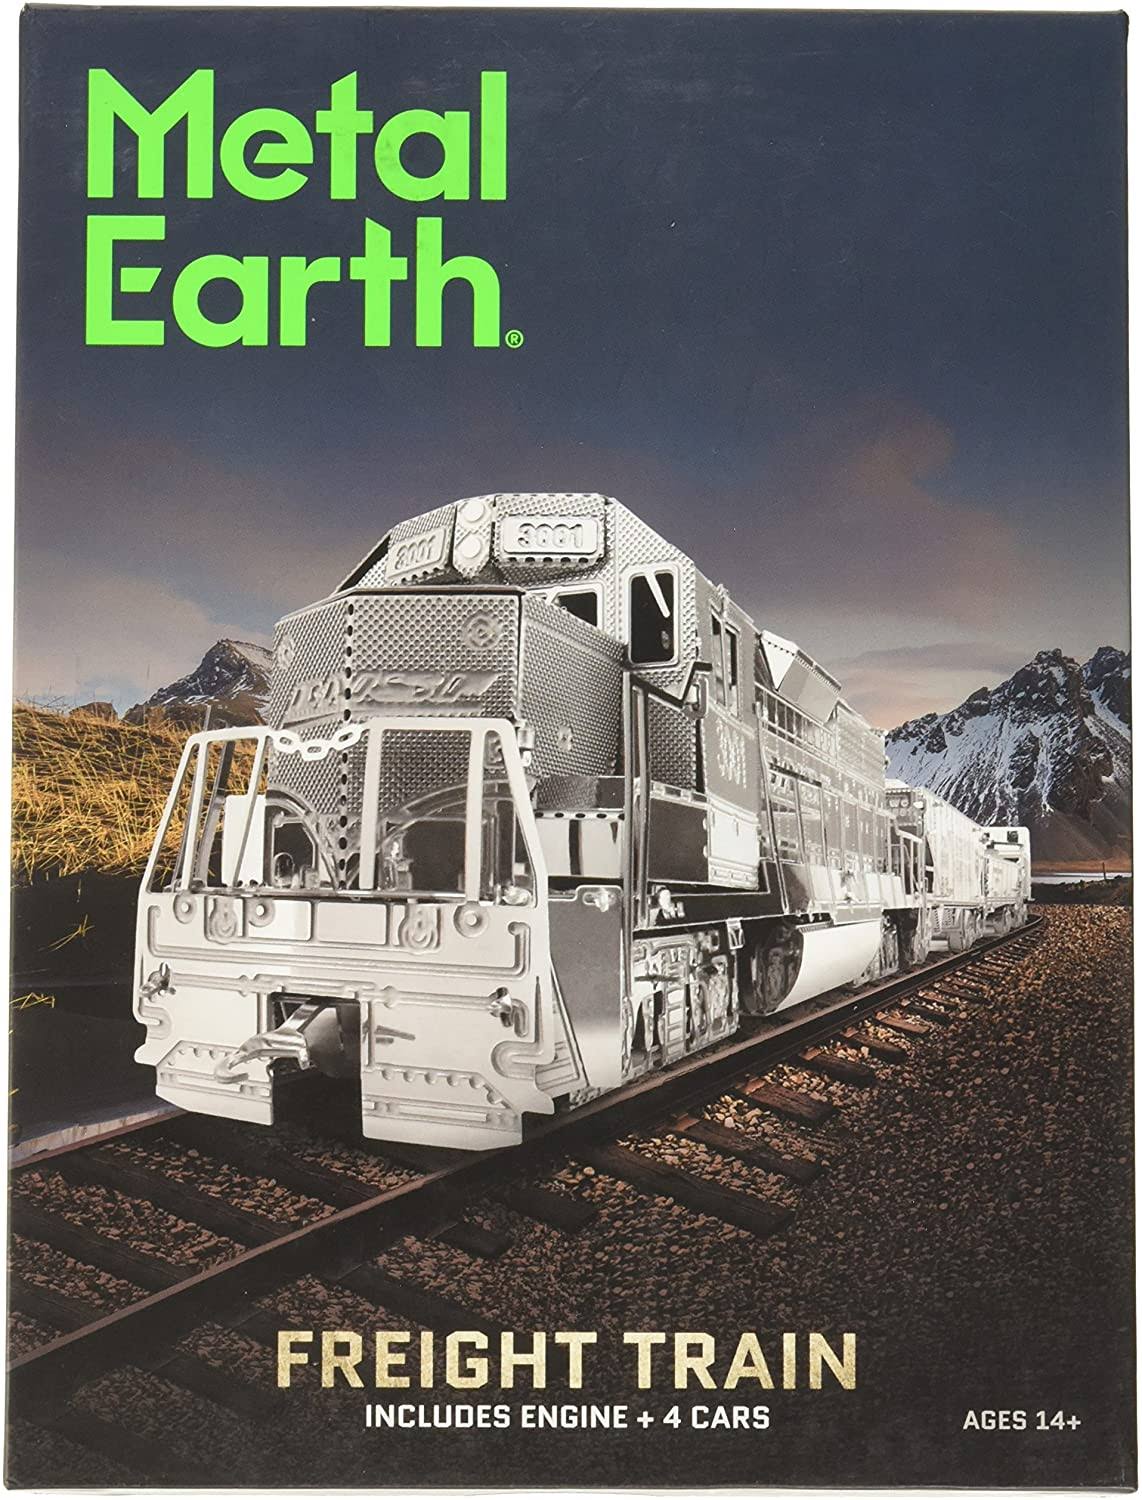 Fascinations Metal Earth Gift Box Set - Freight Train